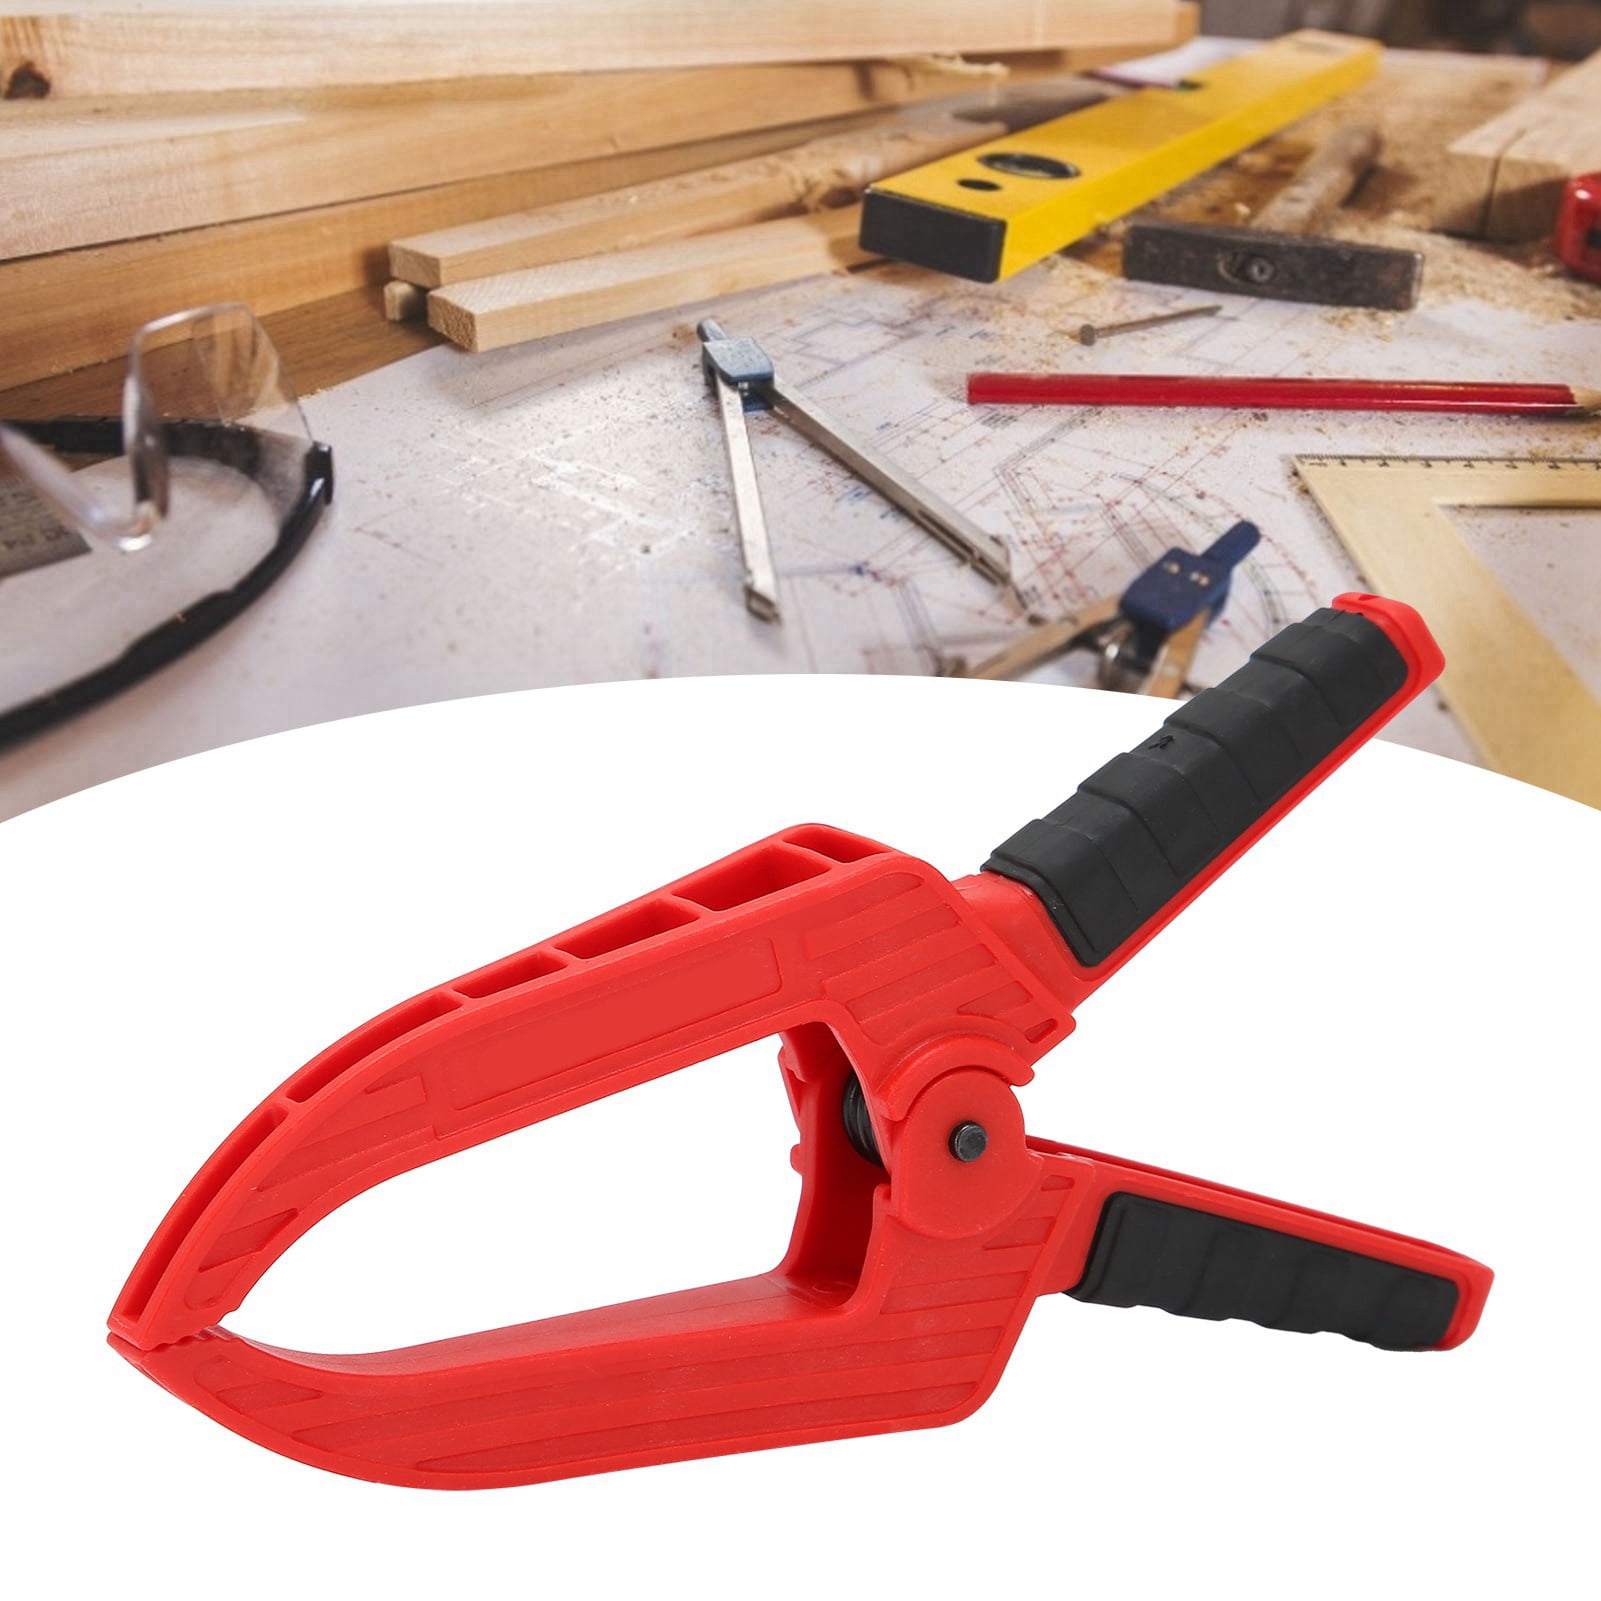 Spring Clamp With Long Flat Nose Plastic Fixing Clamp Woodworking Fixture Tool 